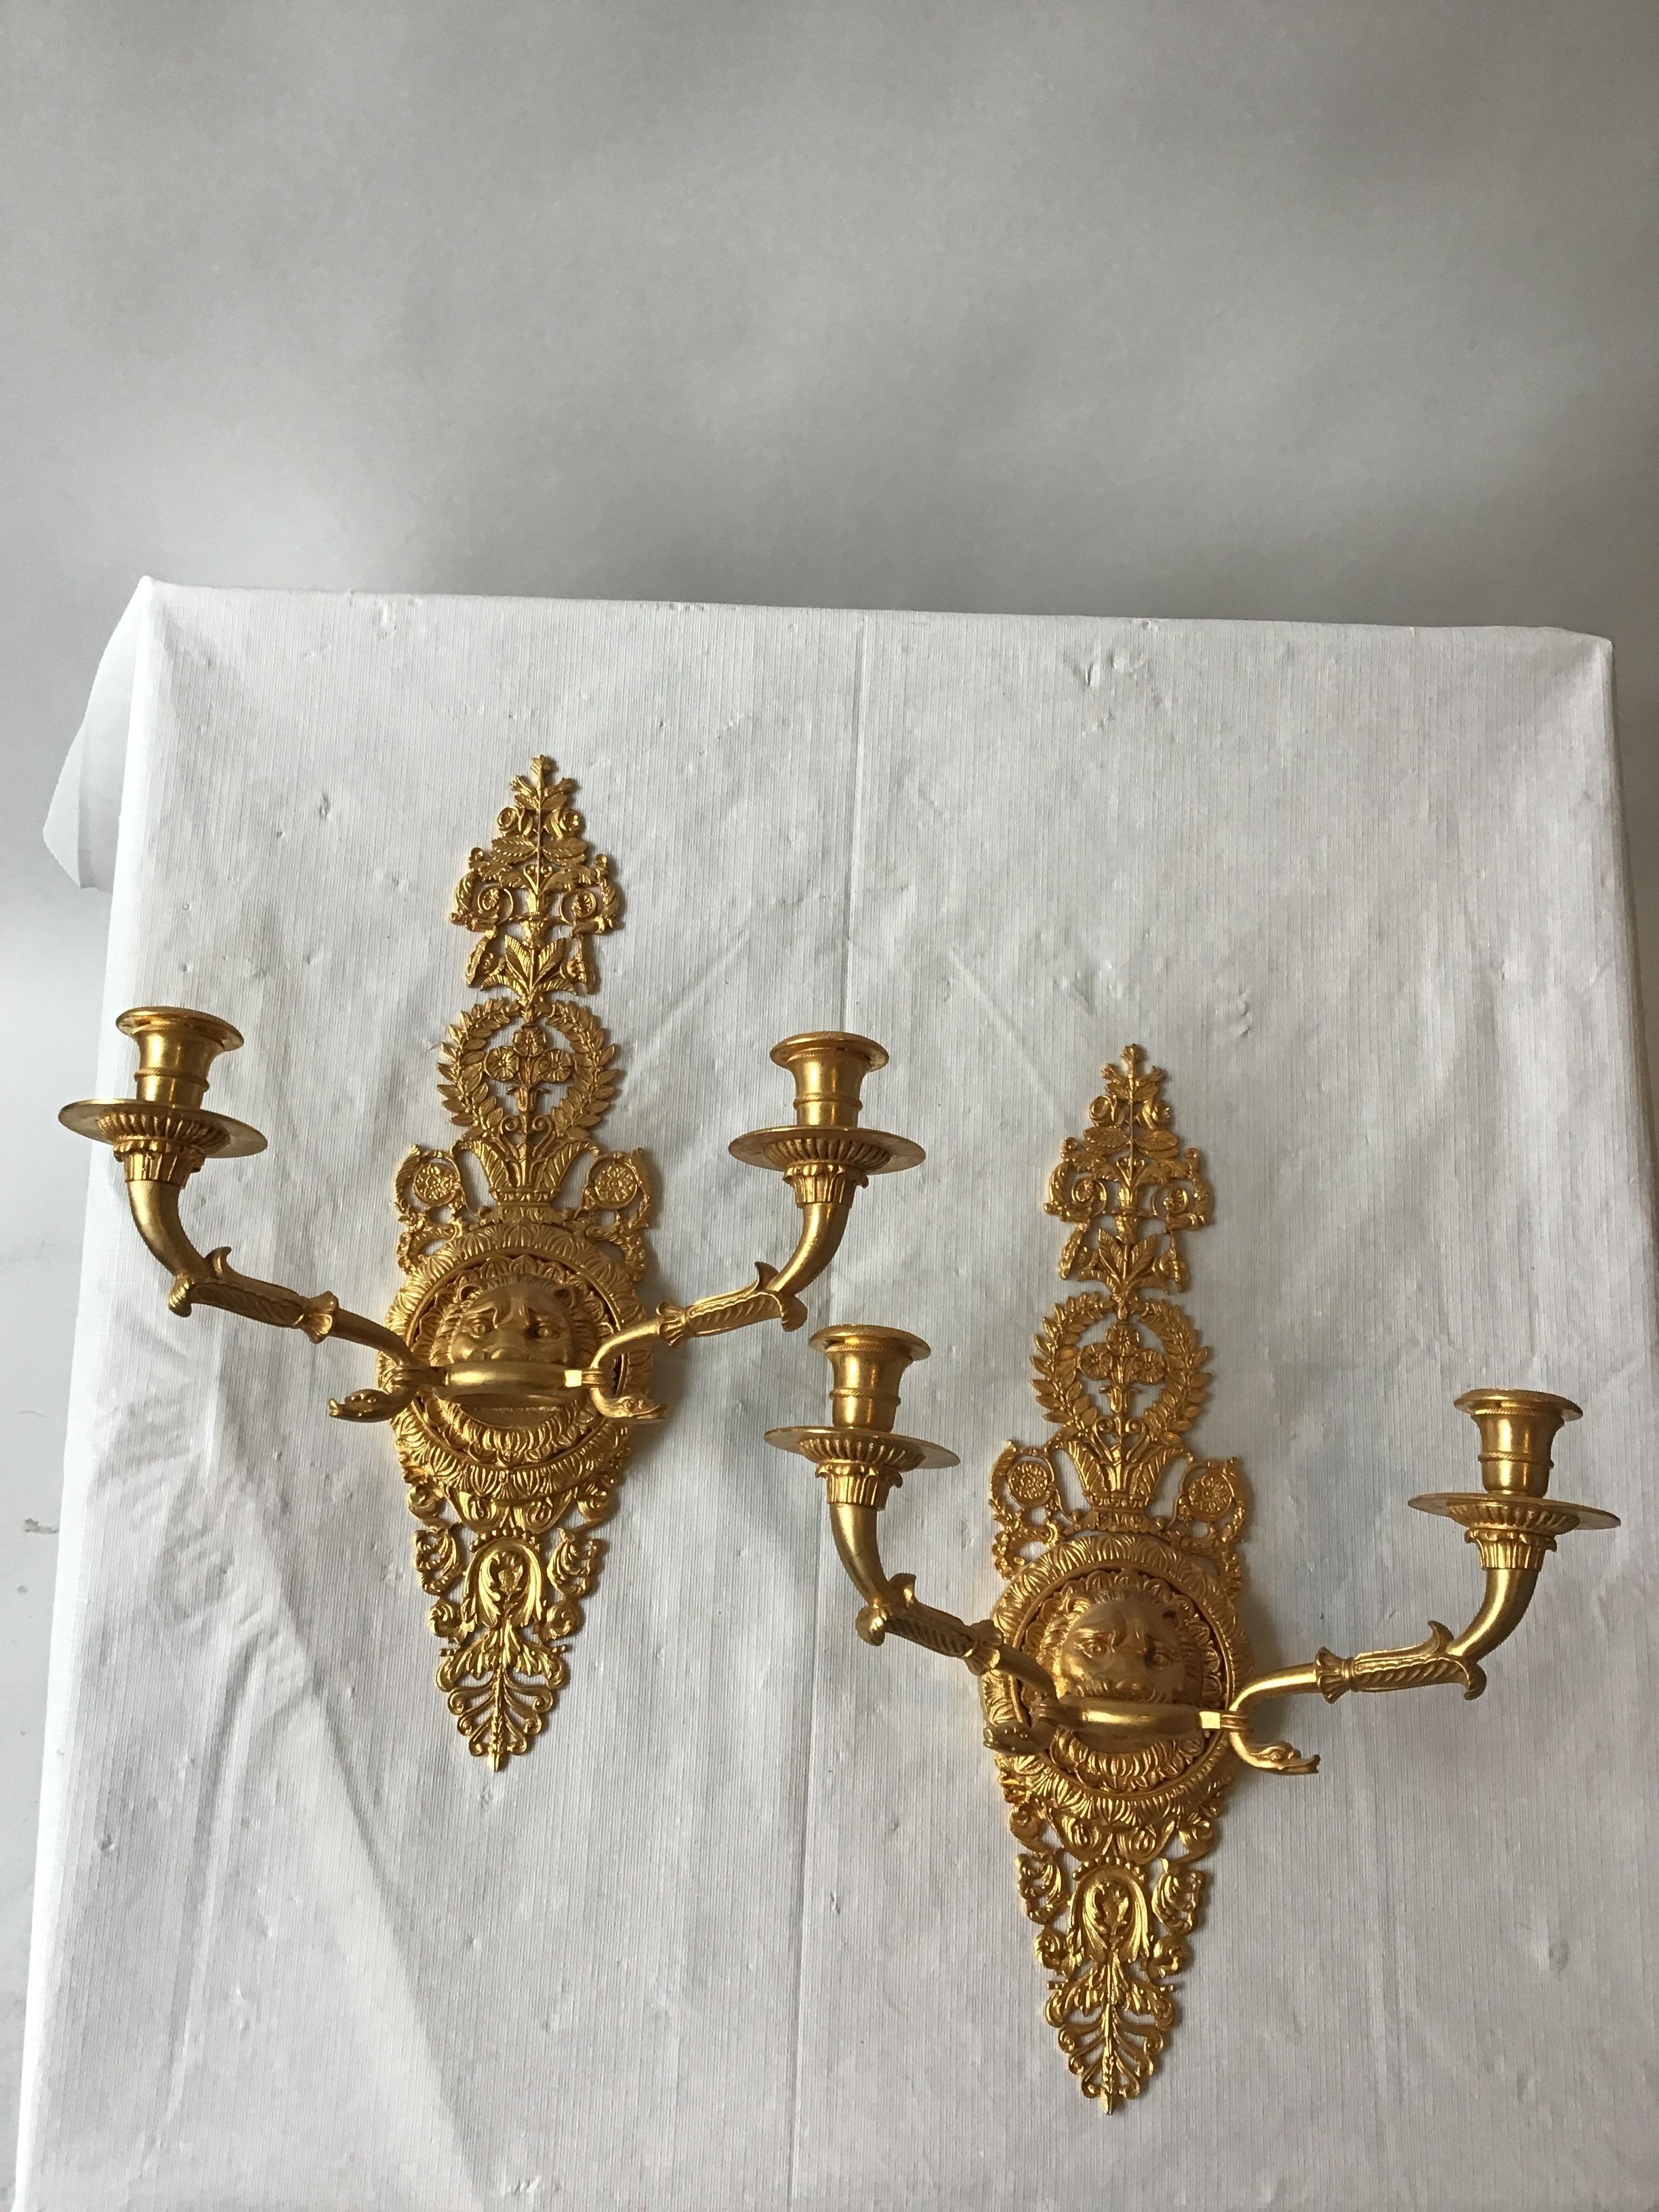 3 Versace style gold-plated lion head classical sconces. Great quality sconces from a Scarsdale, NY mansion. Needs wiring.